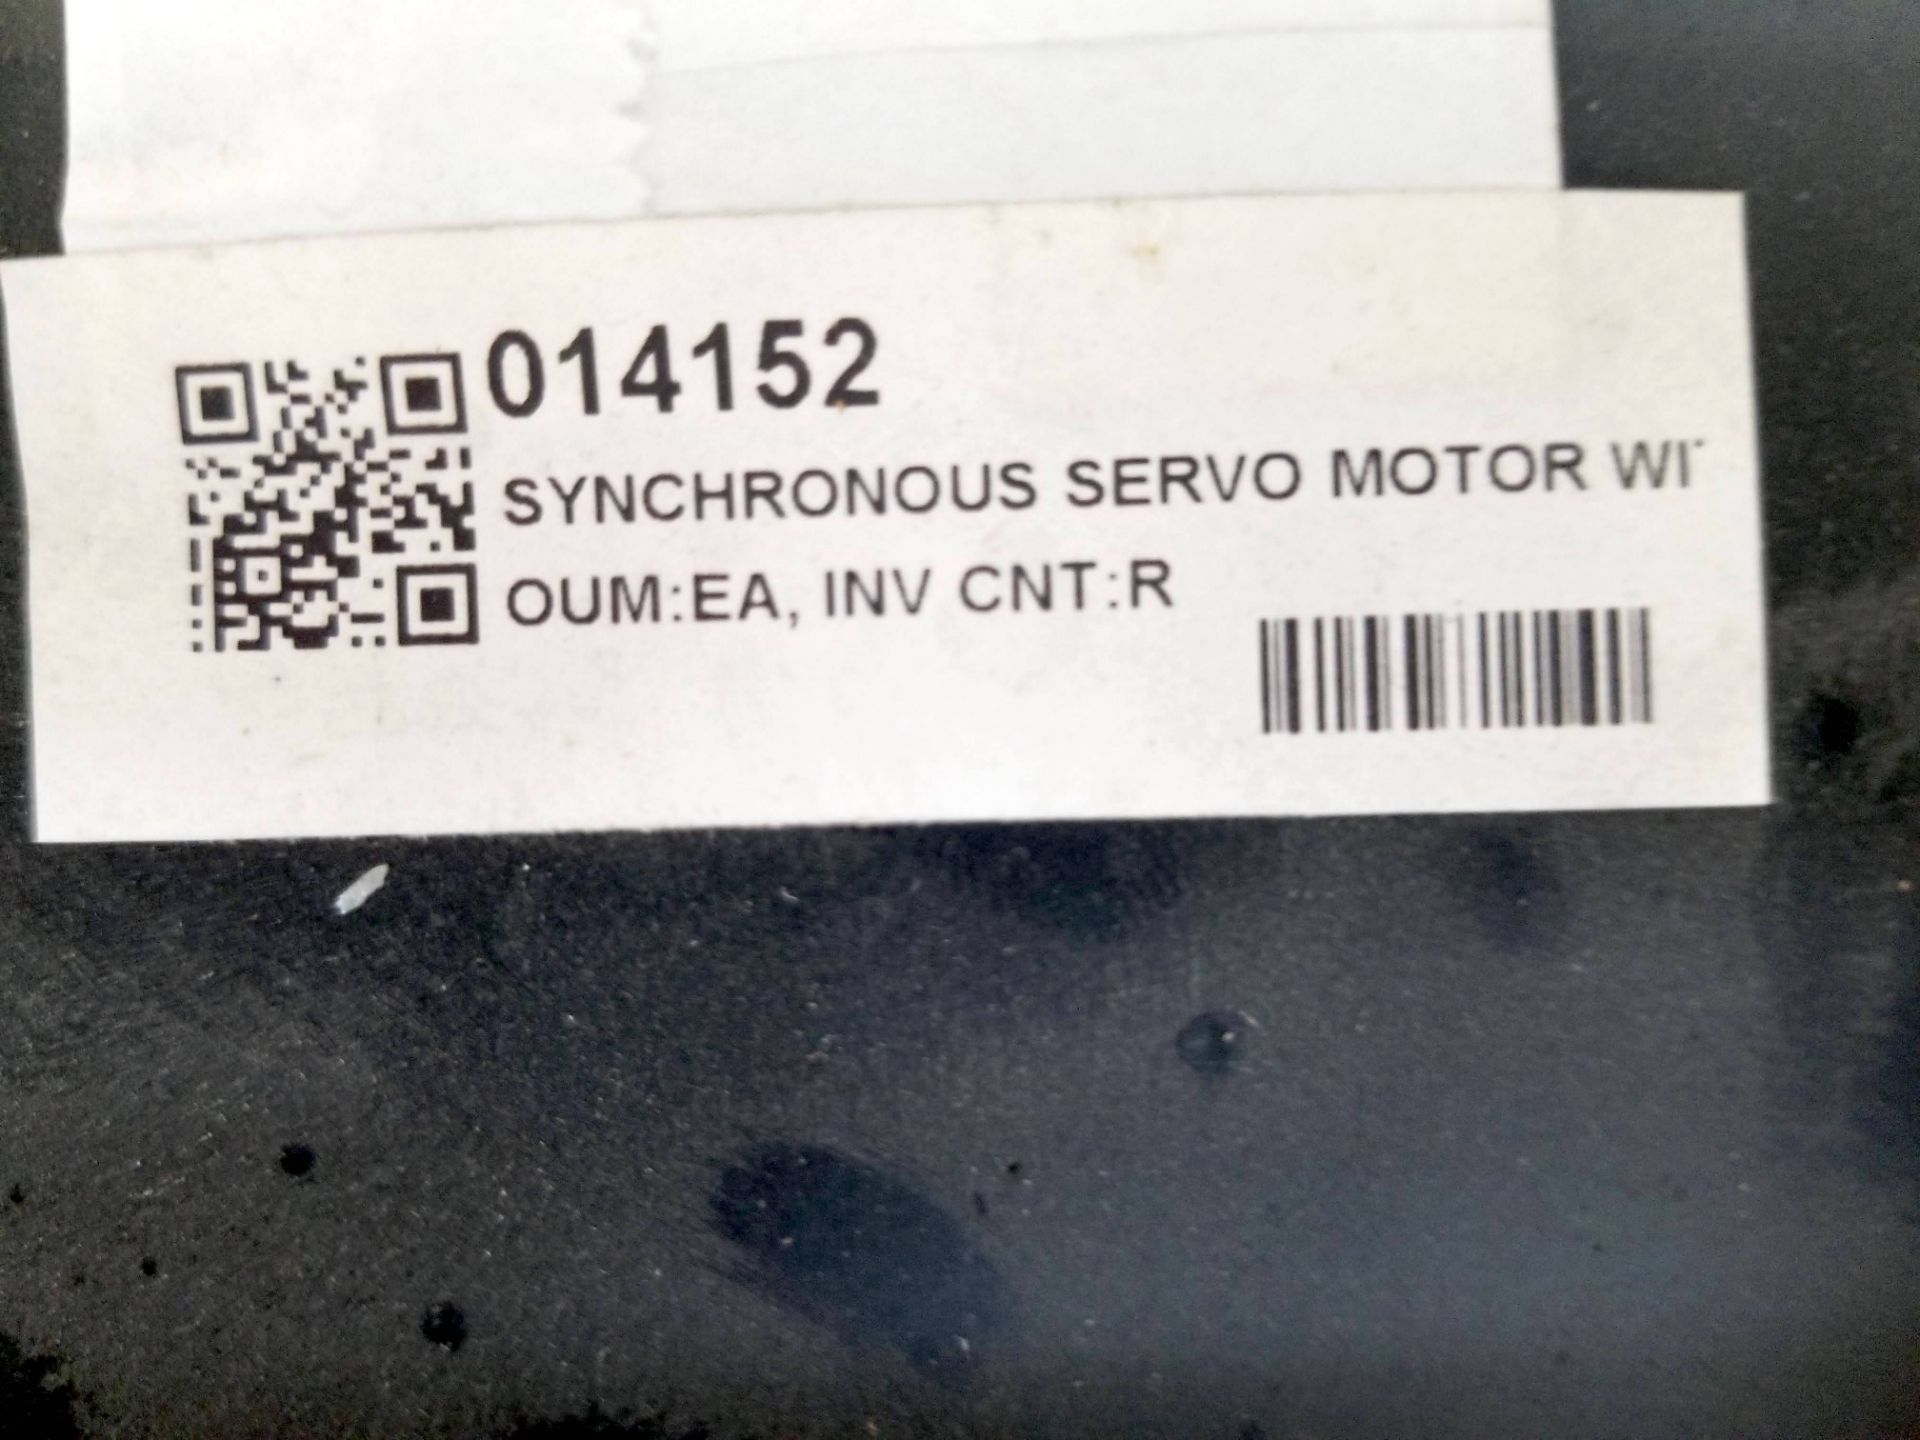 LOT - (6) B&R MOTOR & GEARBOX, SHUTTER N350. MOTOR & GEARBOX ROBOT. SERVOMOTOR AND GEARBOX. - Image 20 of 21